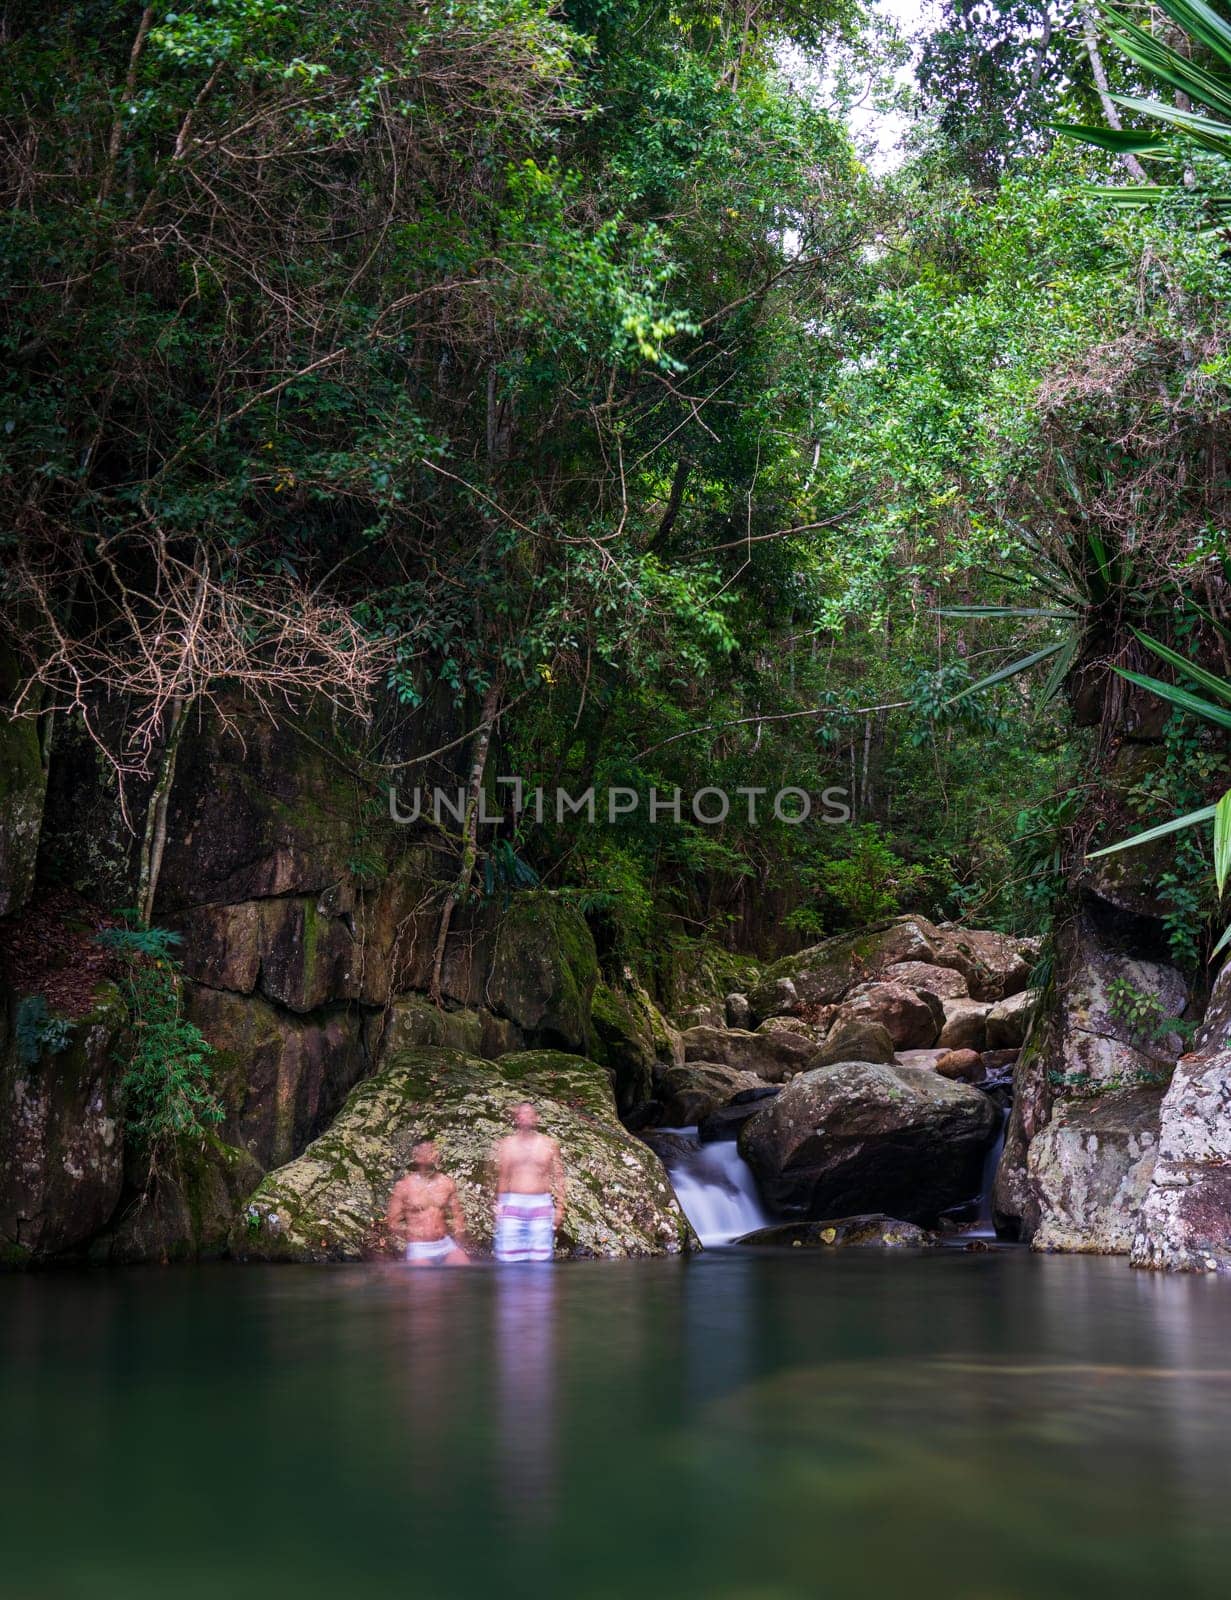 Two unknown people find tranquility in a jungle oasis, surrounded by lush greenery and a babbling creek.